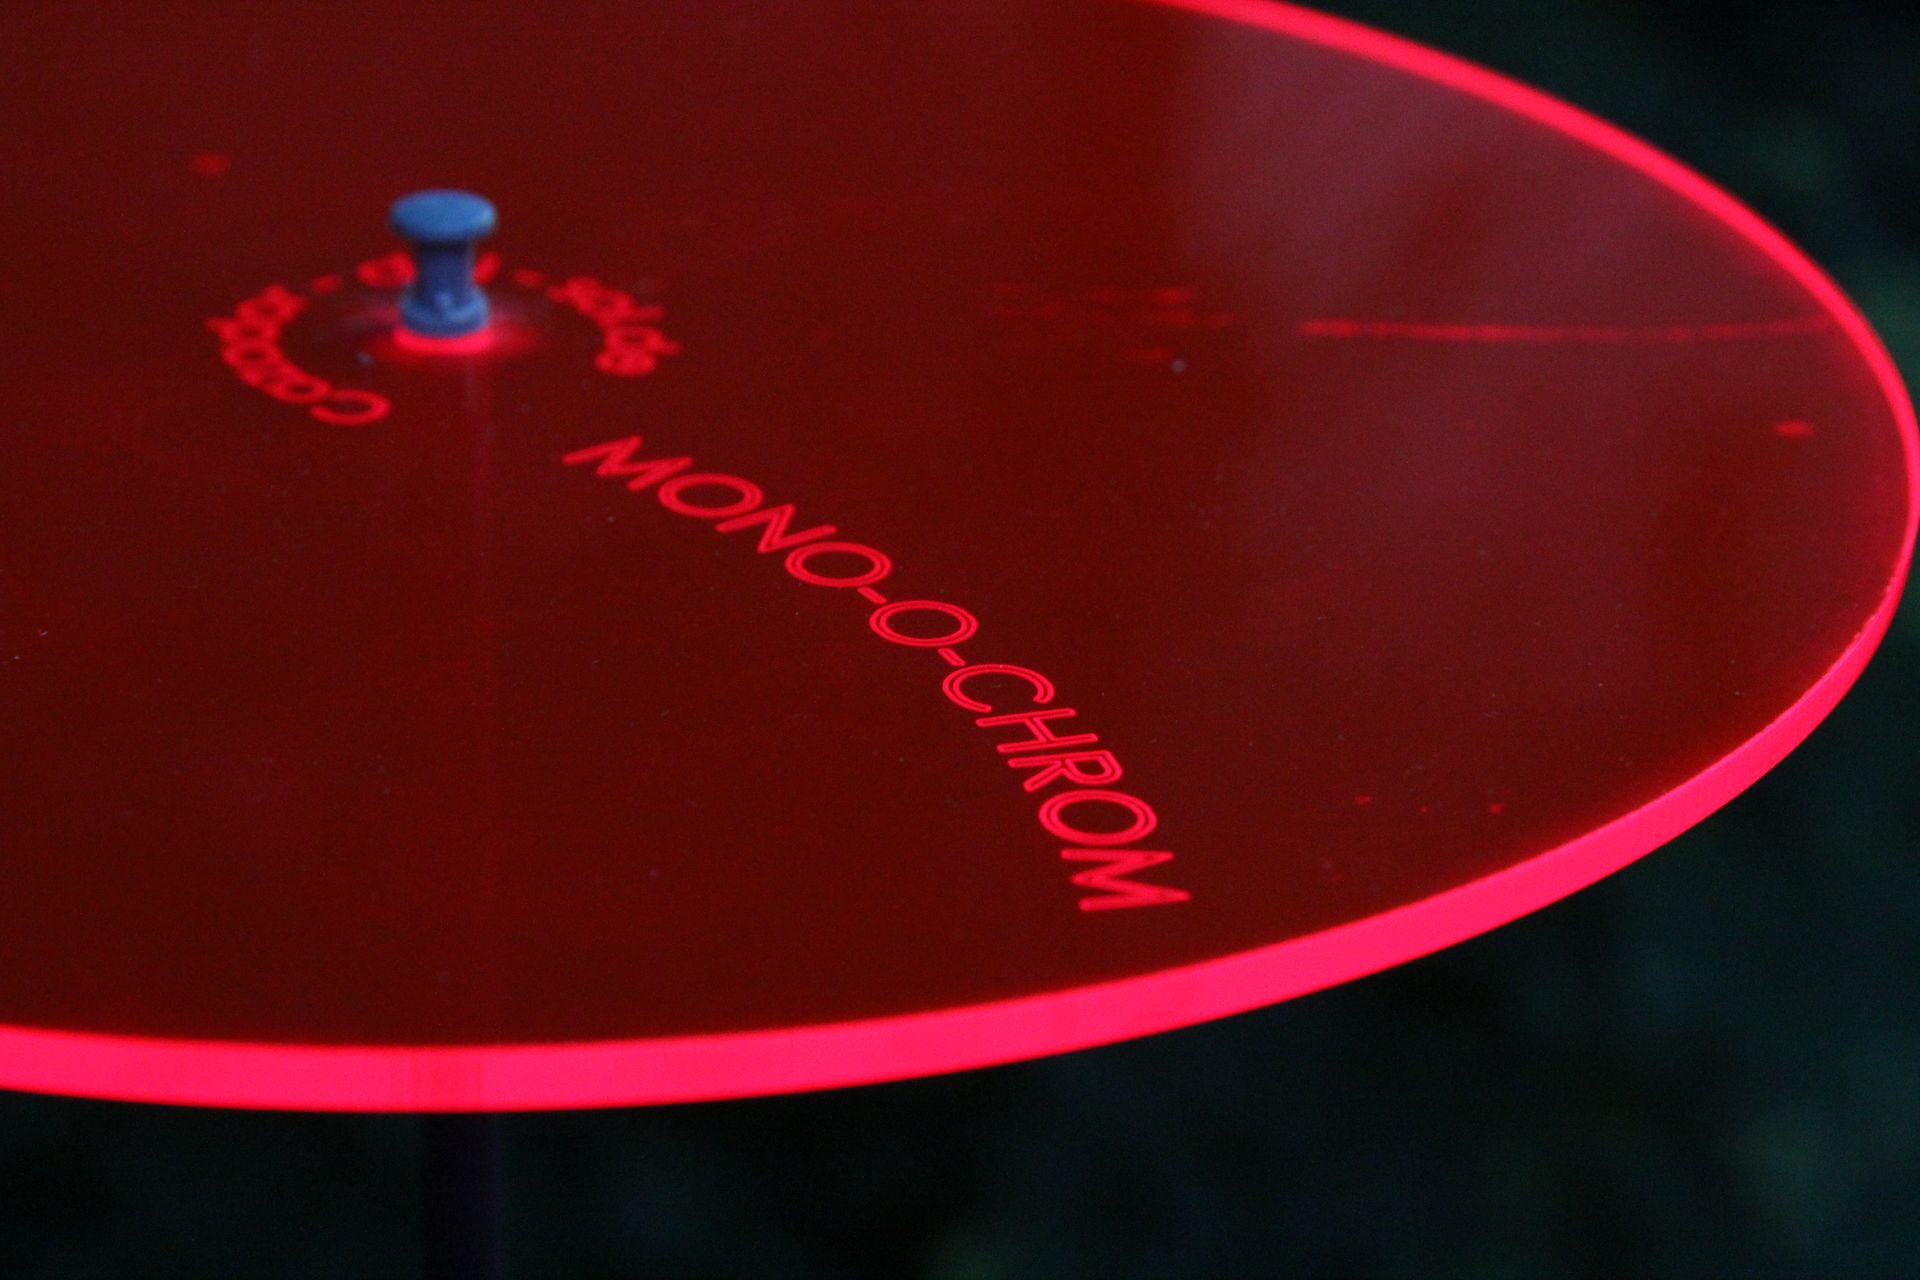 special engraving on red disc